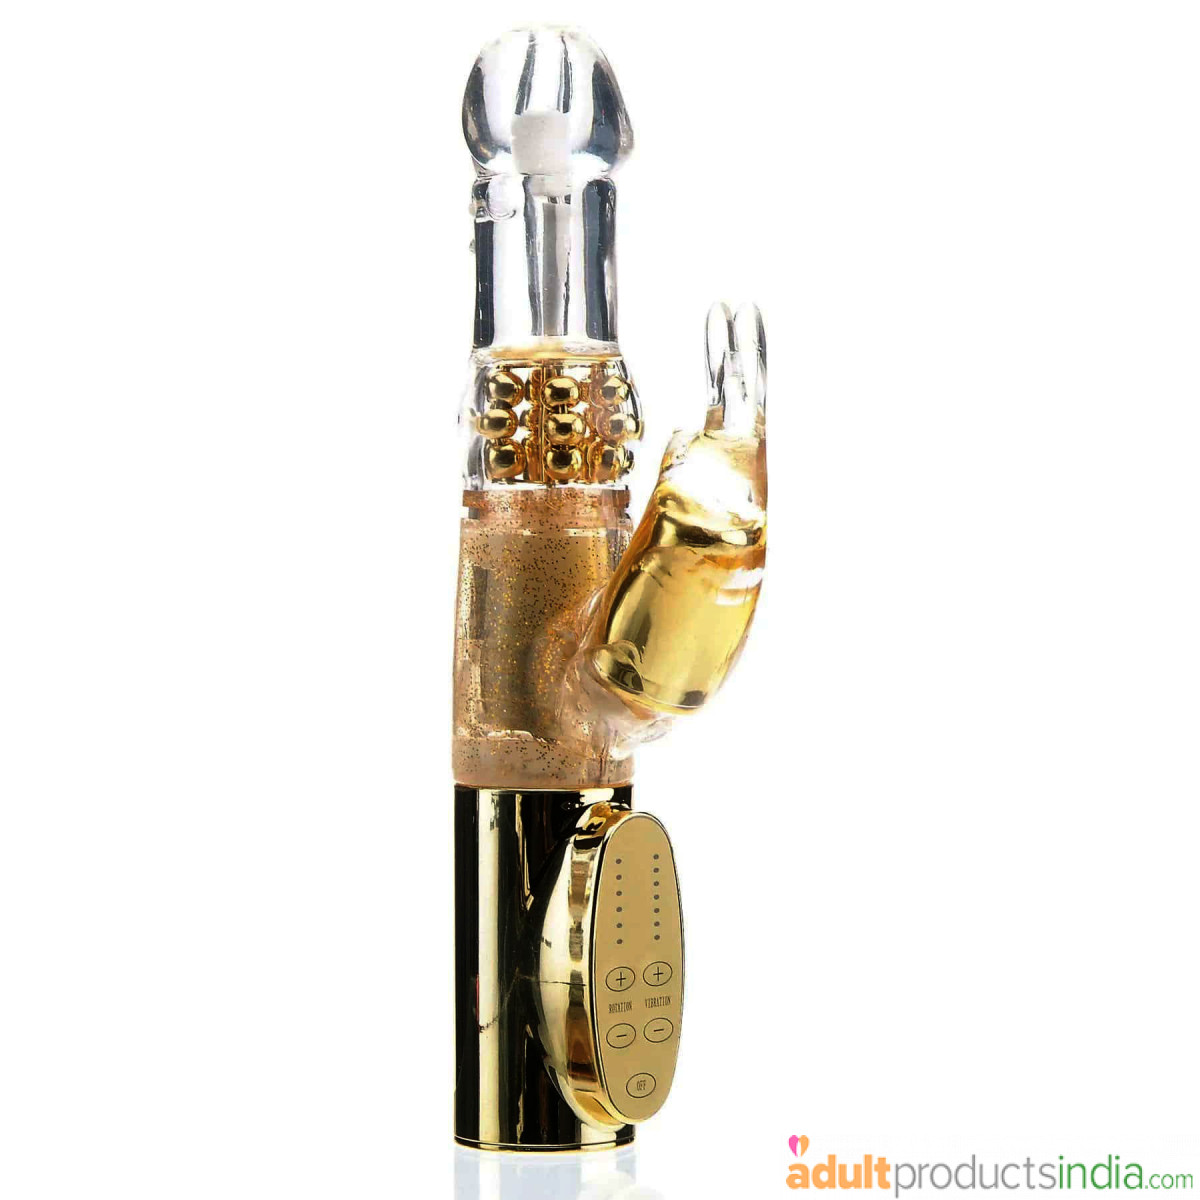 Golden Lover Rabbit With 7 Mode Vibration